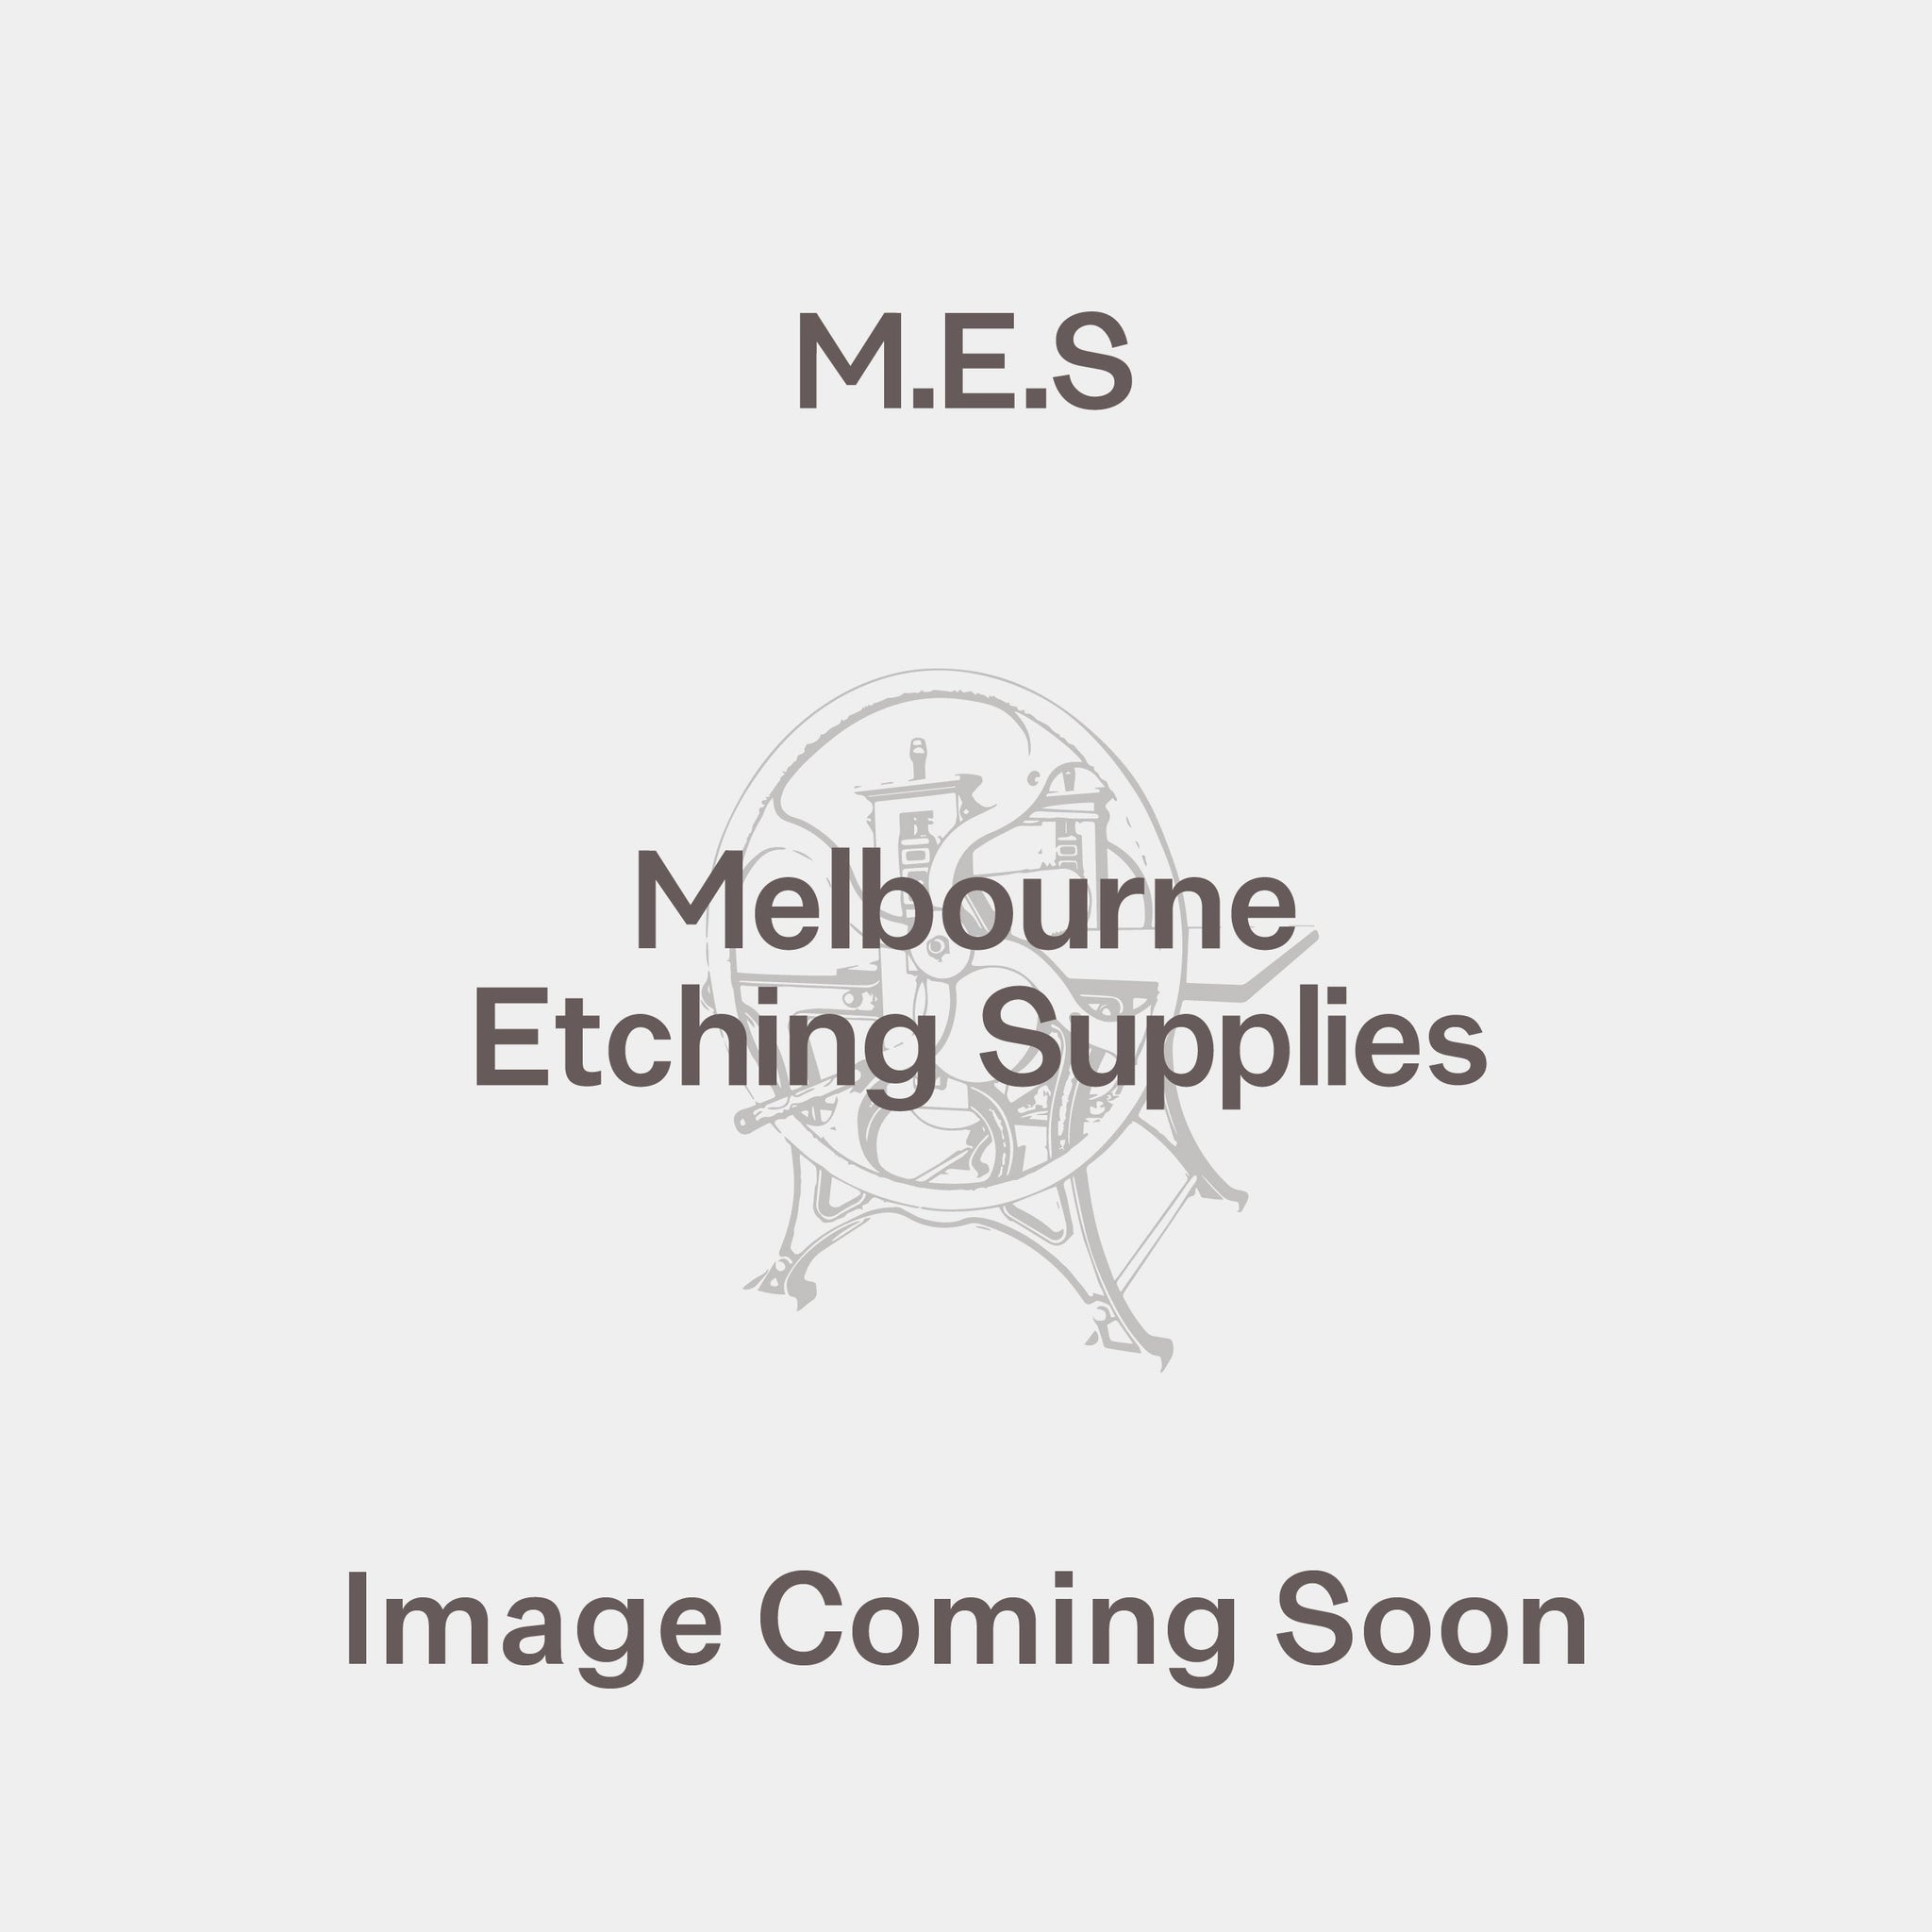 Sommerset Enhanced 1188x890mm - Melbourne Etching Supplies